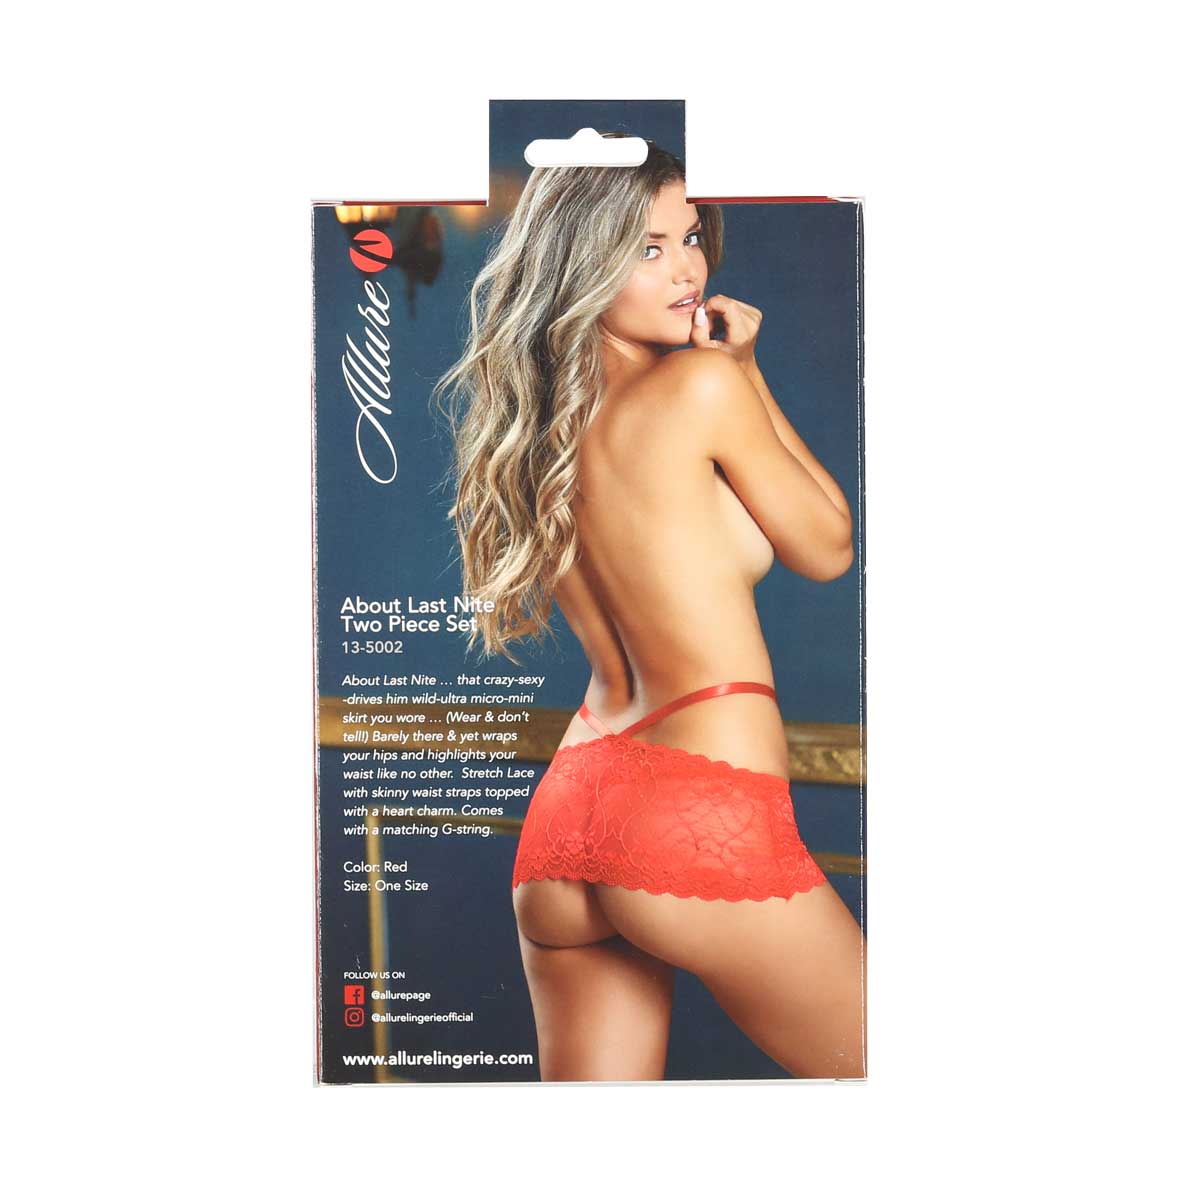 Allure – About Last Nite 2 -Piece Set – Red – One Size